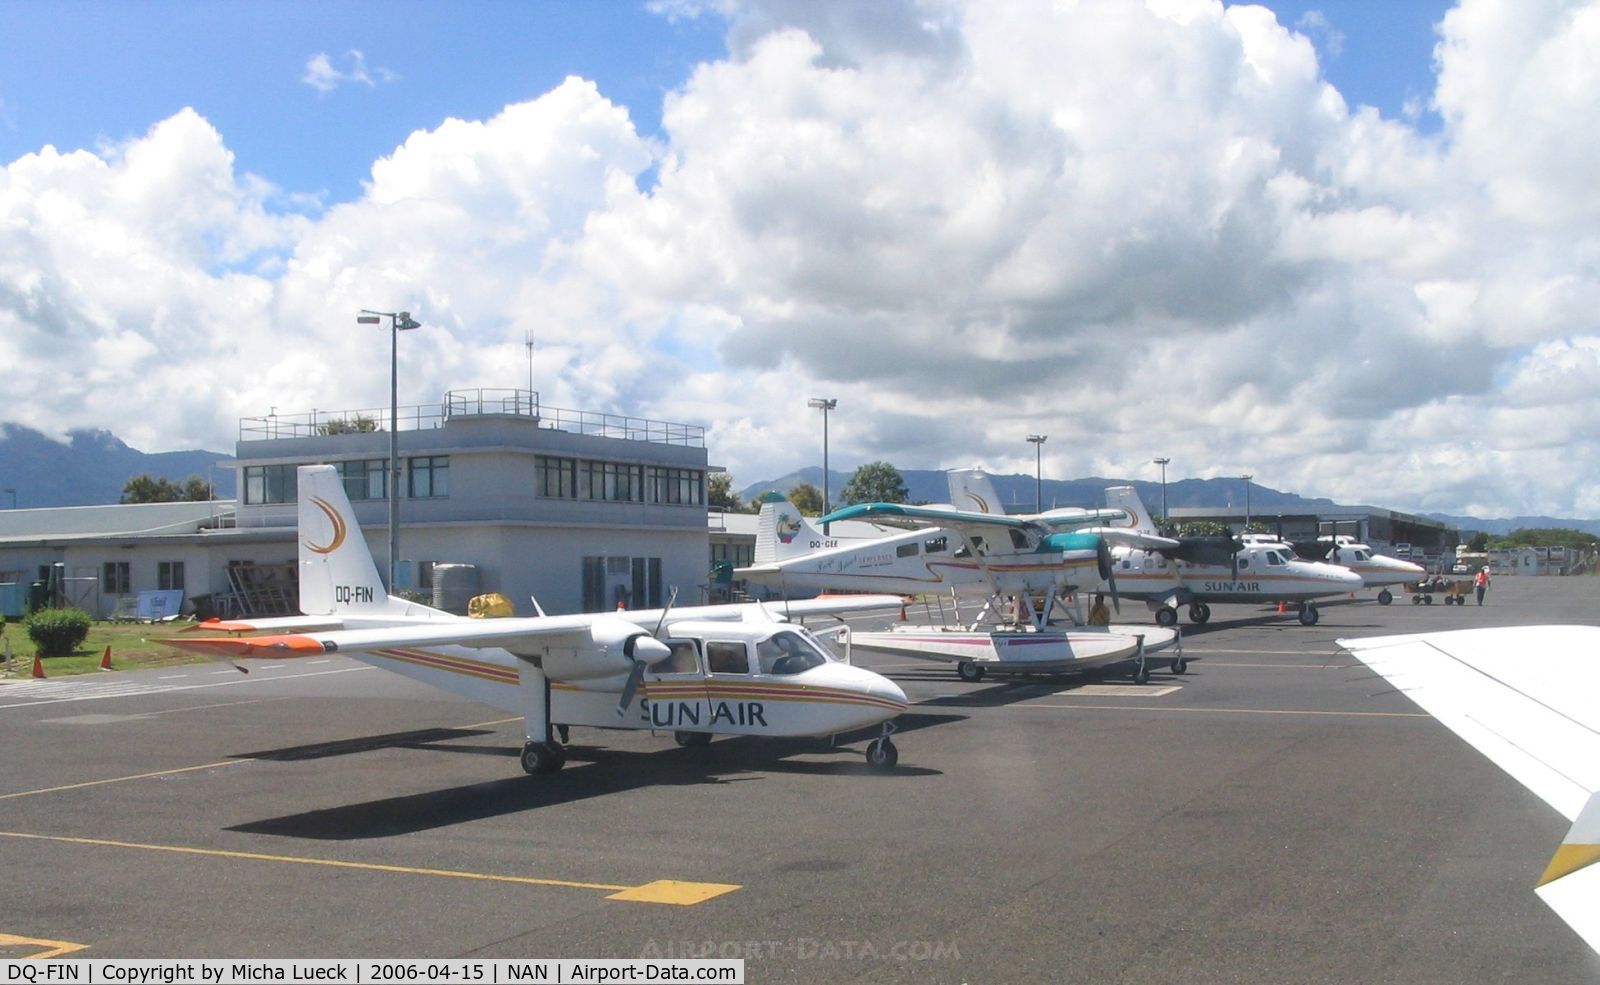 DQ-FIN, 1970 Britten-Norman BN-2A-26 Islander C/N 159, Line up of BN Islander of Sunair (DQ-FIN), DHC 3 Beaver of Pacific Island Seaplanes (DQ-GEE), and two DHC 6 Twin Otters of Sun Air